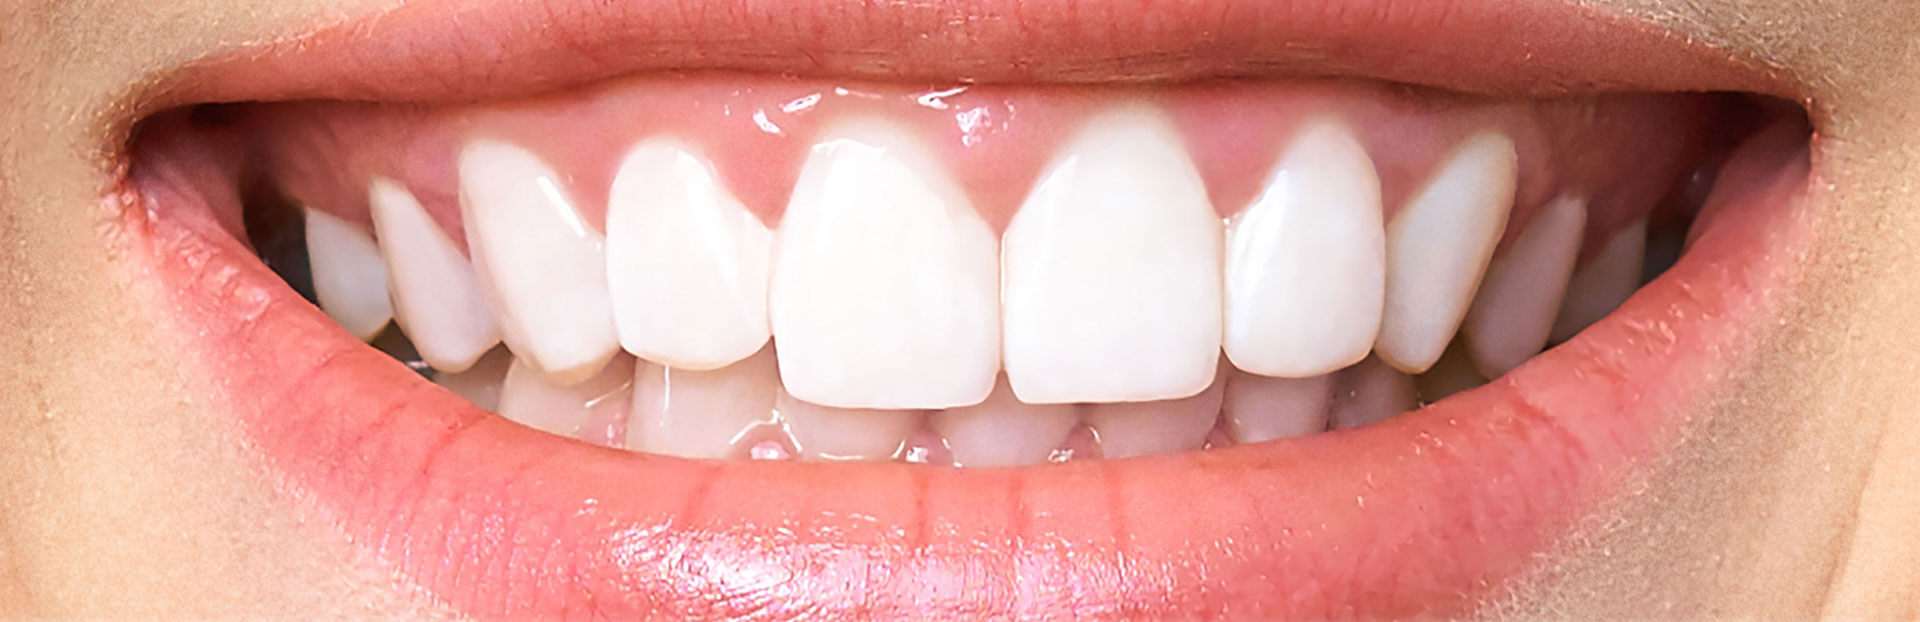 teeth-before-after-whitening-compressed